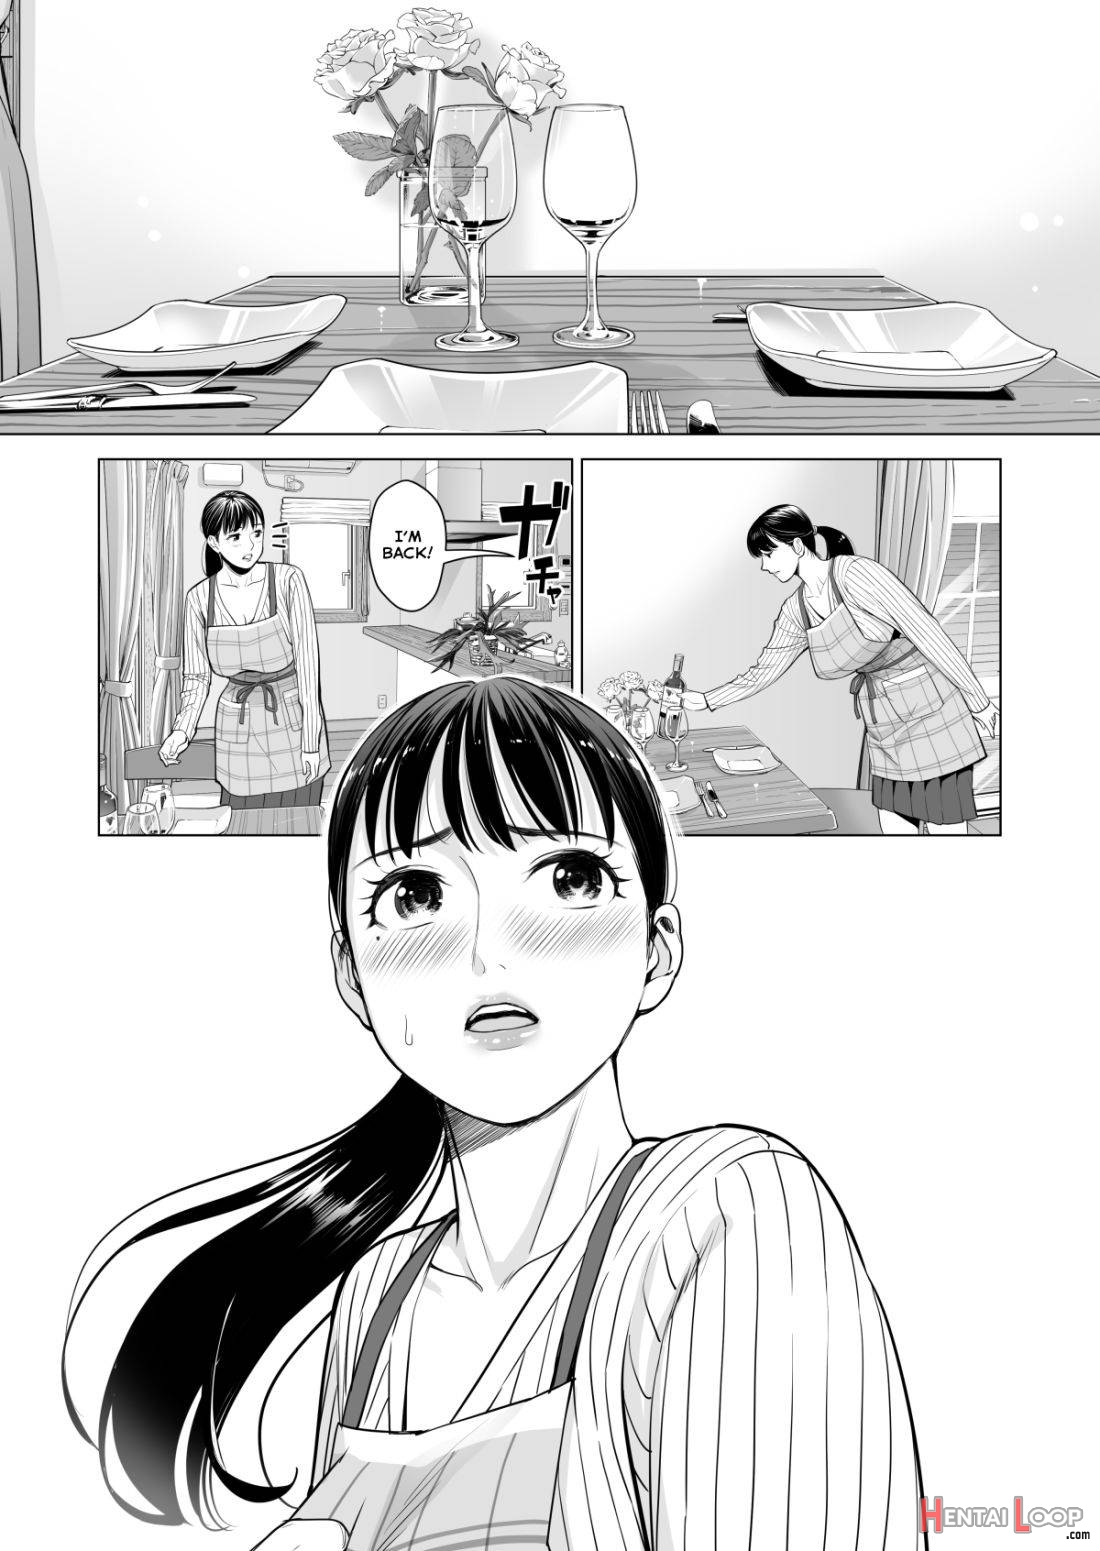 Tsukiyo no Midare Zake (Kouhen) Moonlit Intoxication ~ A Housewife Stolen by a Coworker Besides her Blackout Drunk Husband ~ Chapter 2 page 70